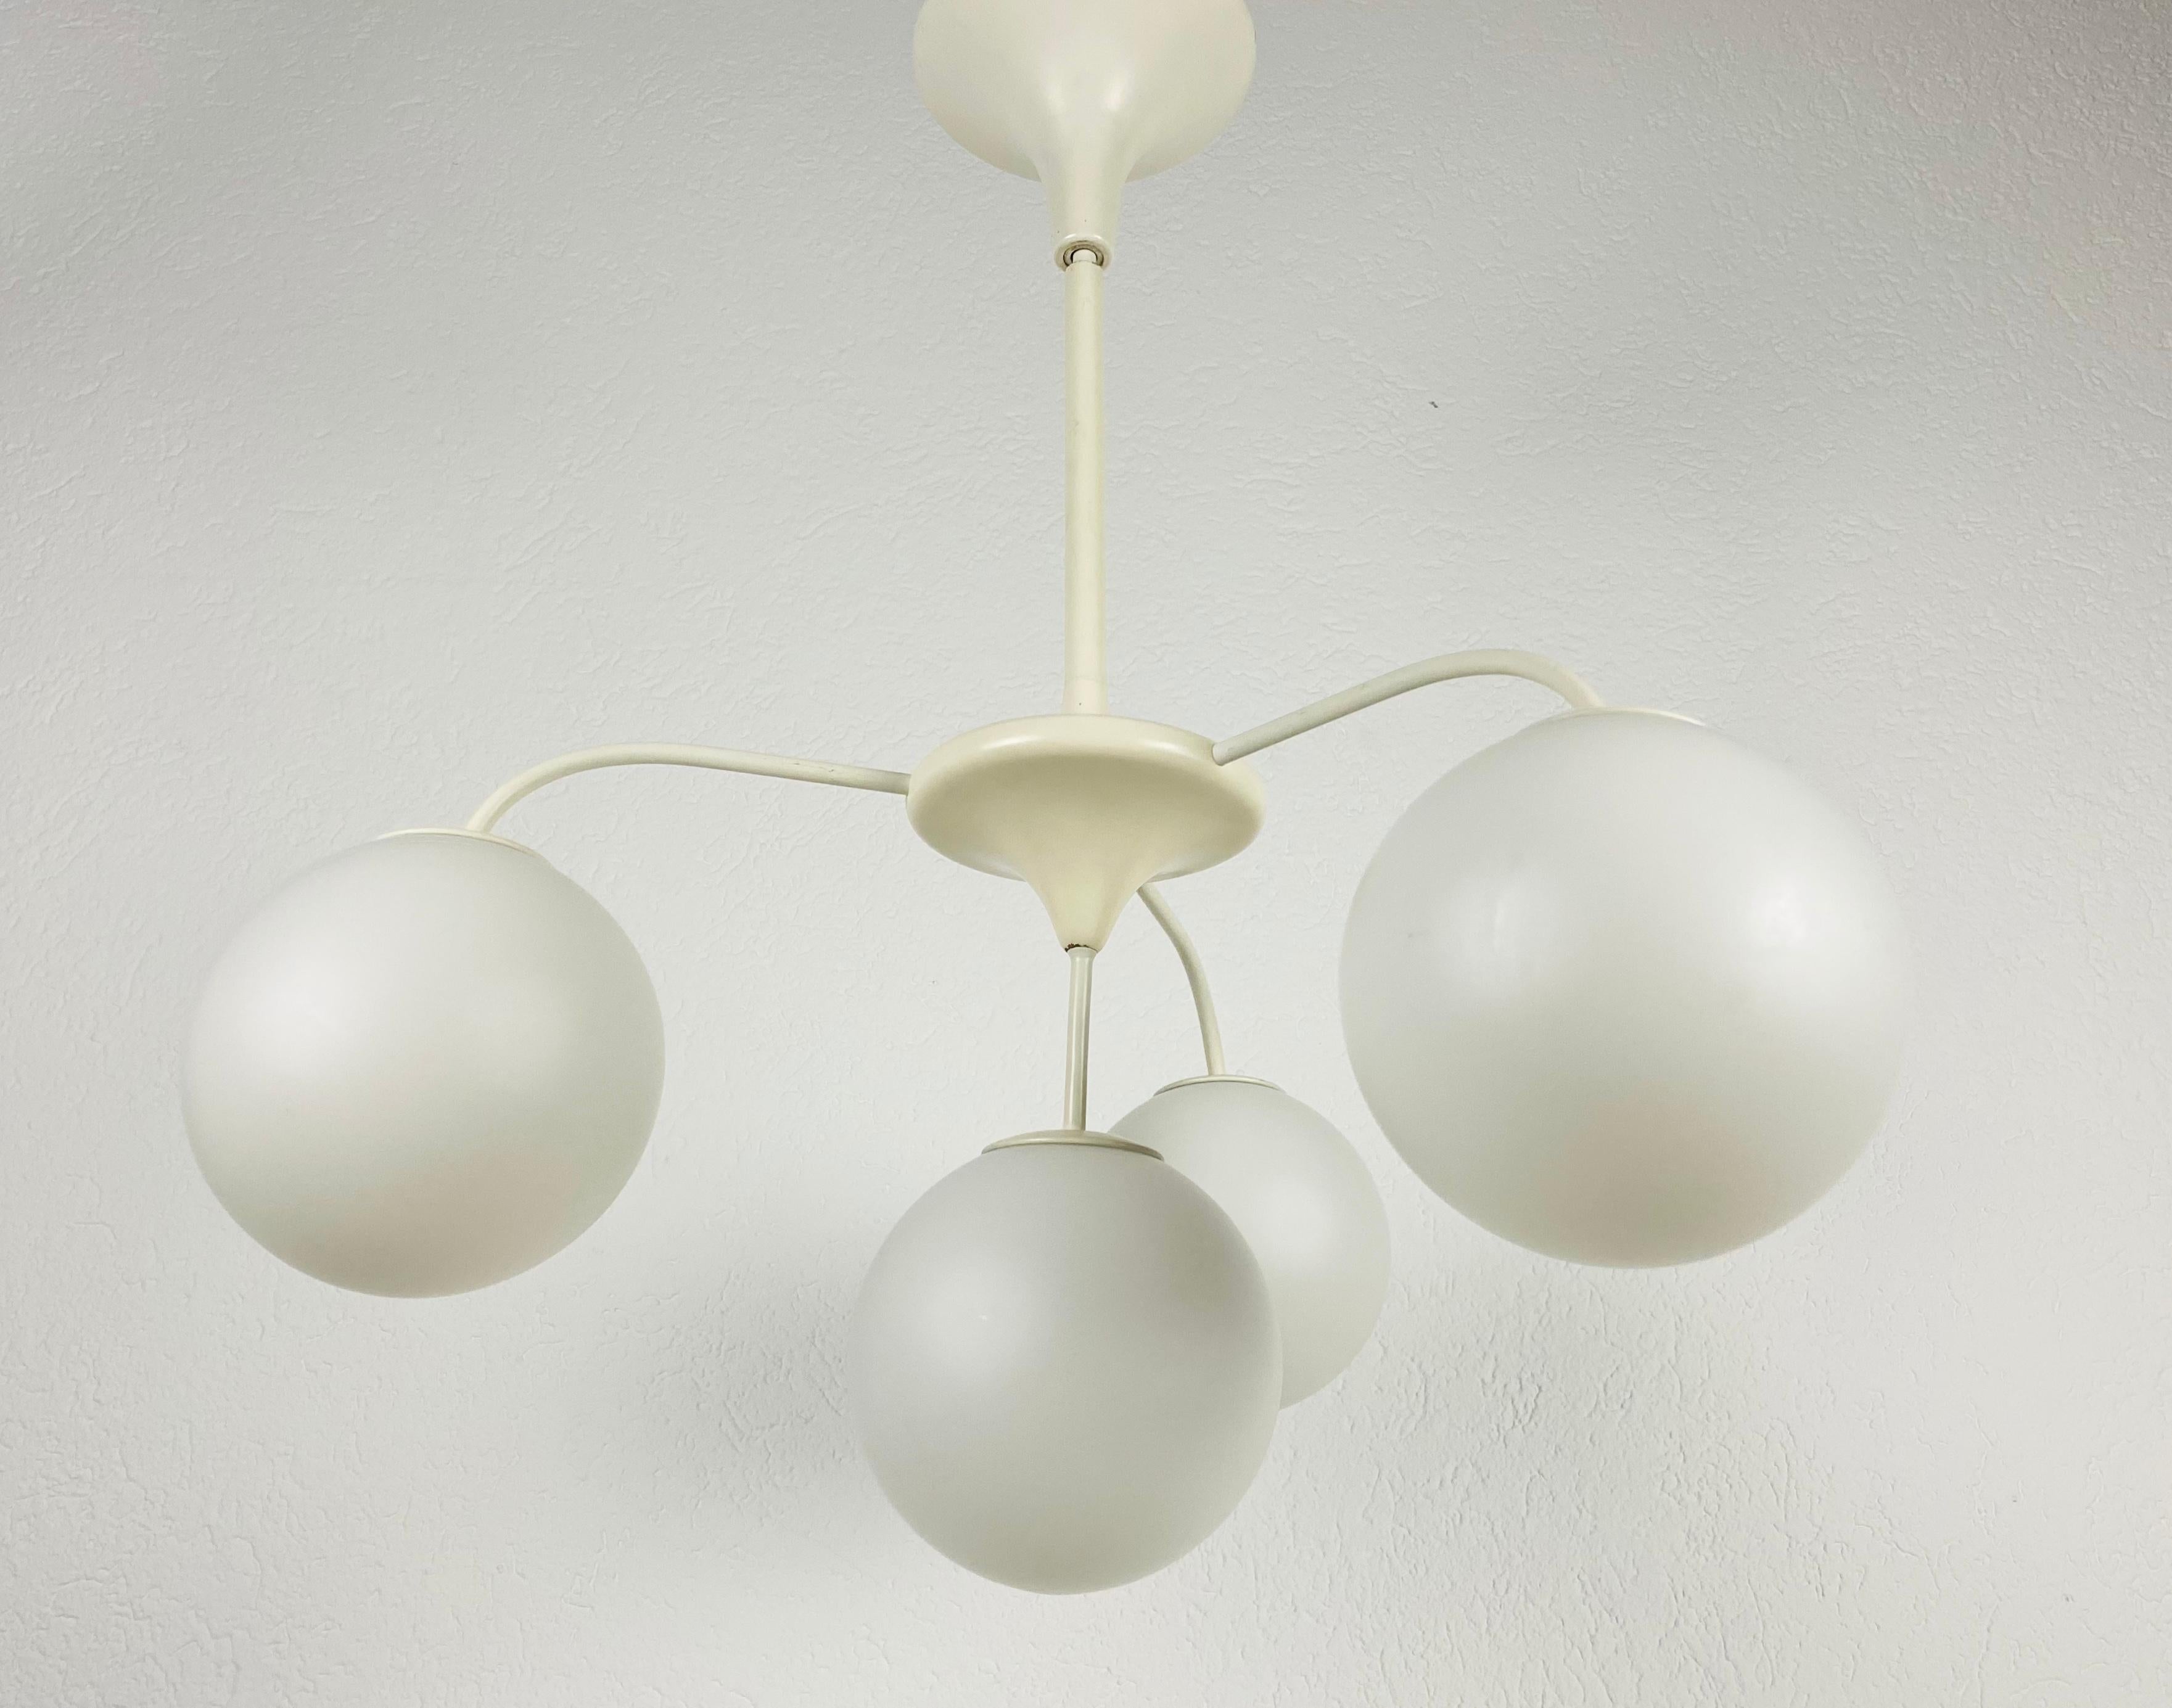 A midcentury chandelier by Max Bill for Temde made in Switzerland in the 1960s. It is fascinating with its Space Age design and four opaque balls. The white circular body of the light is made of full metal, including the arms. White bar with white